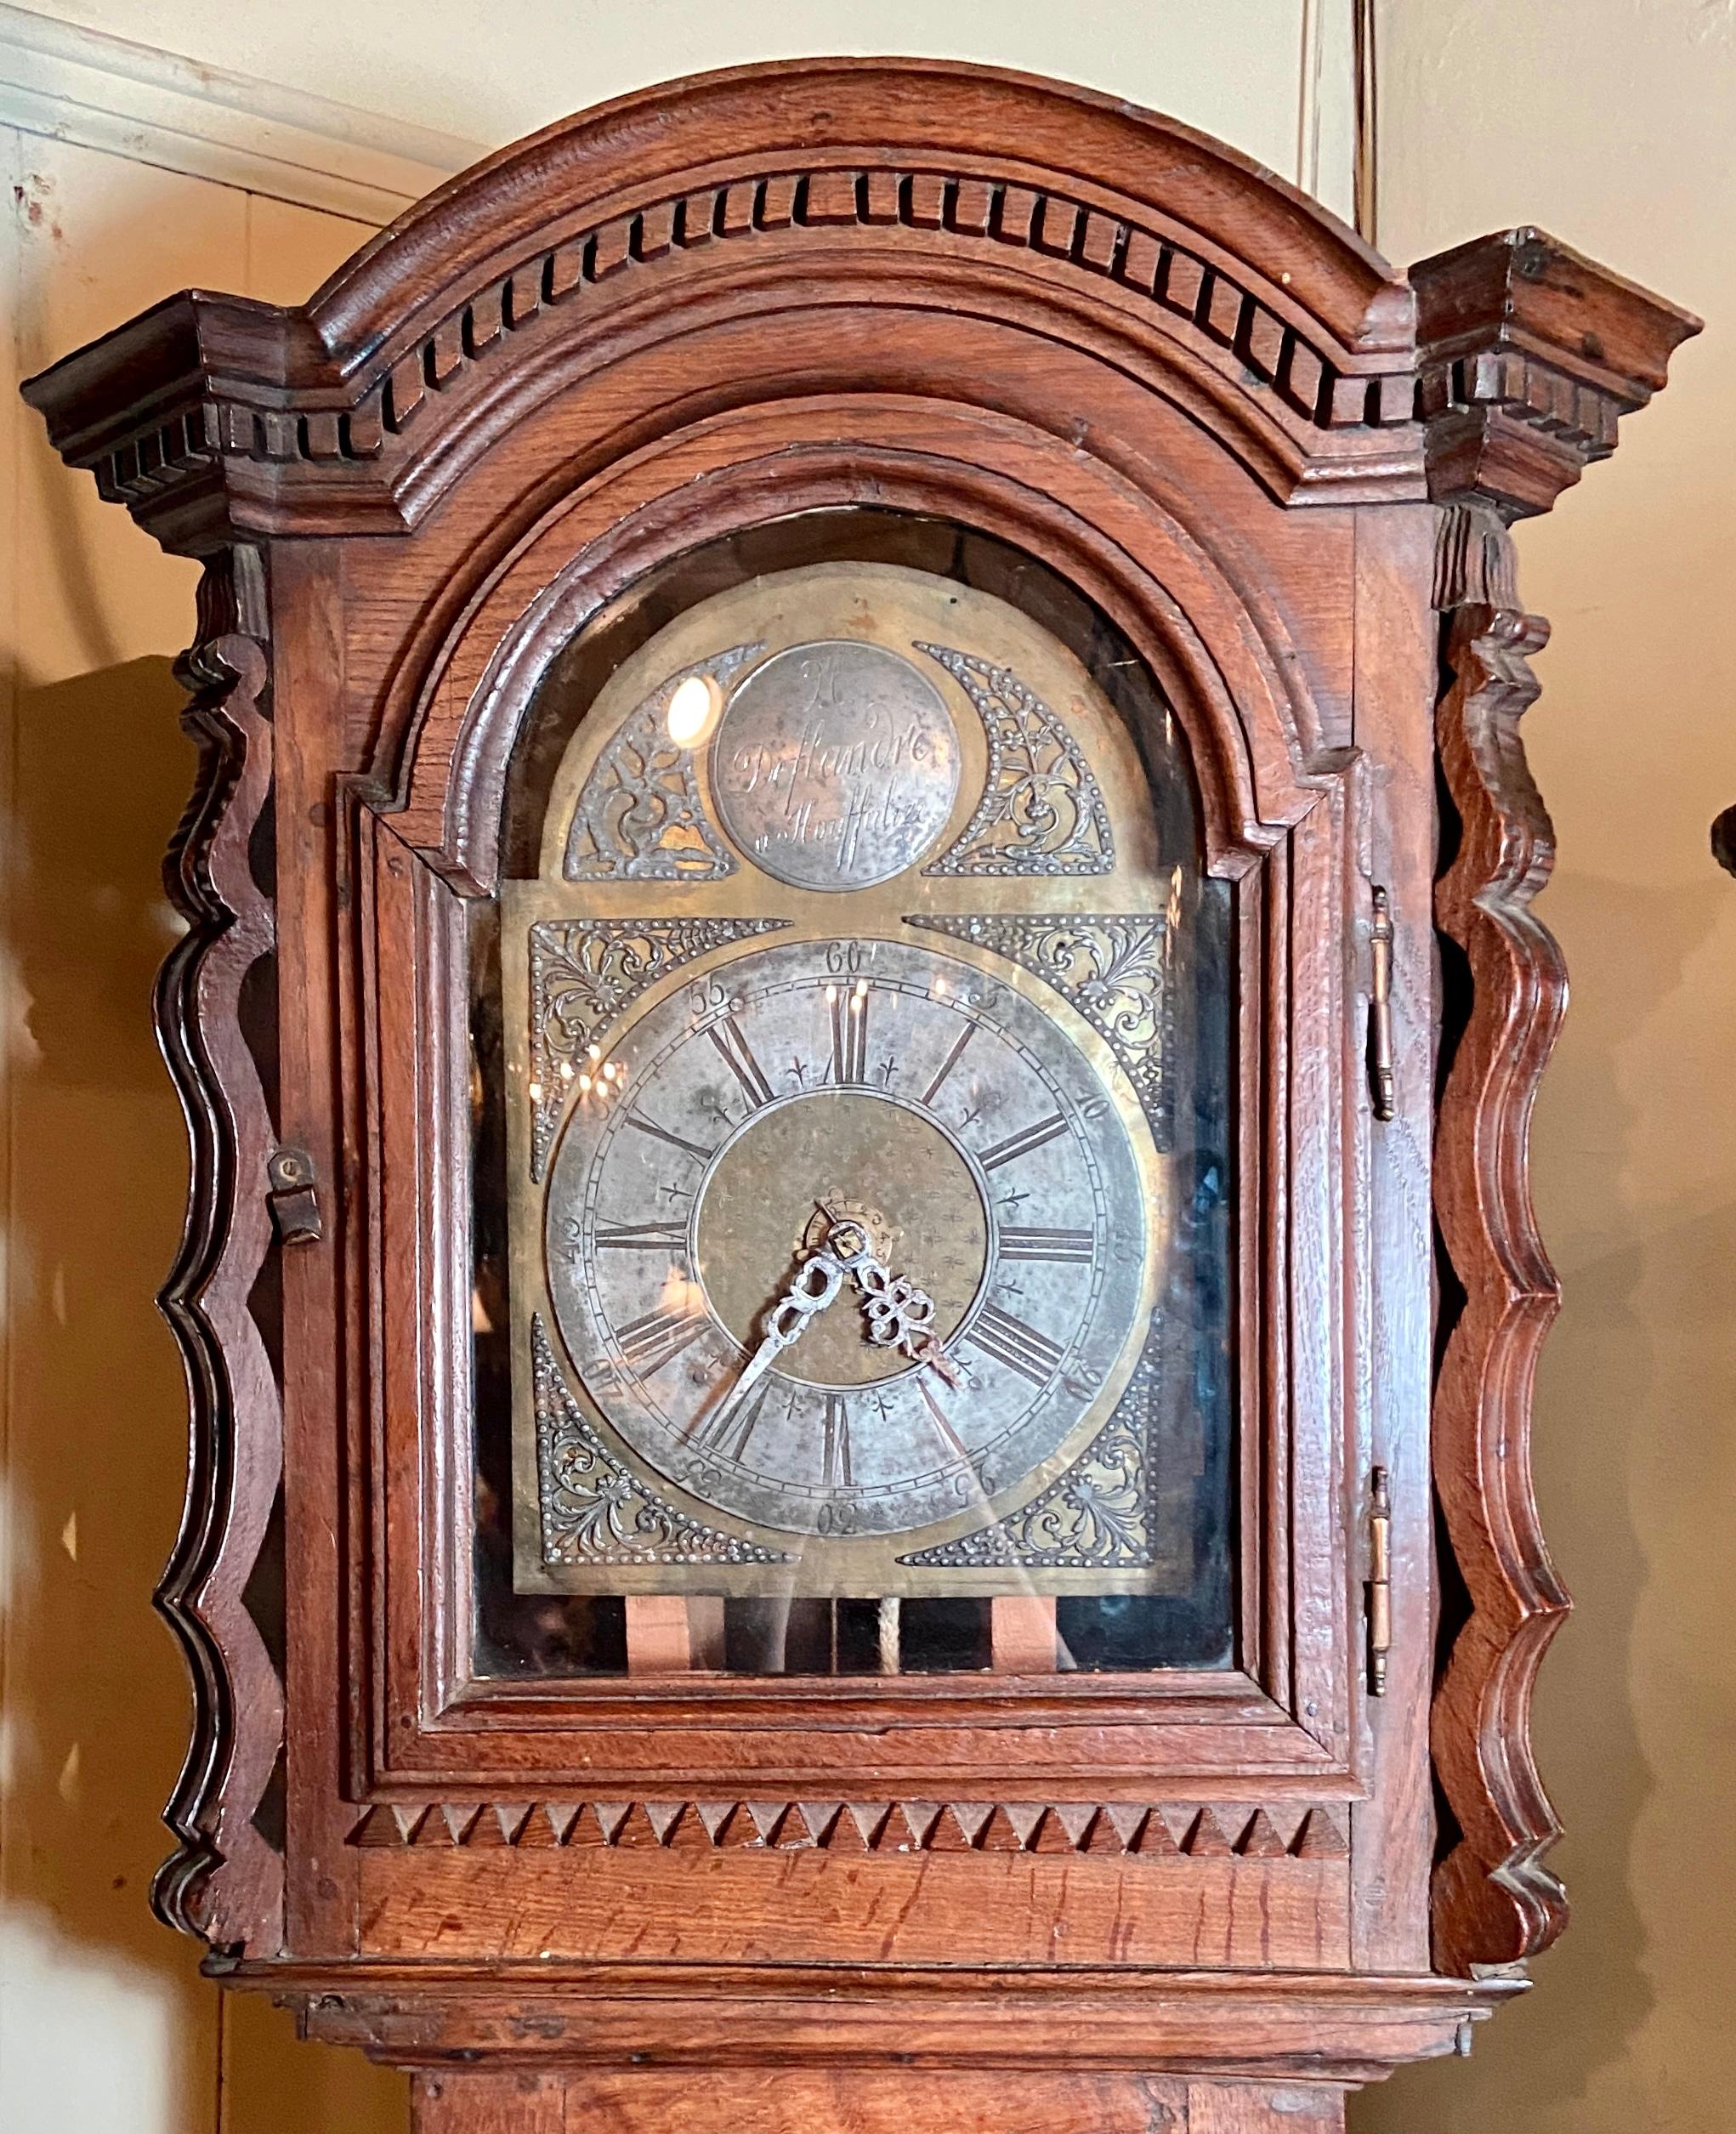 Antique 18th century French decorative long case clock with newly refurbished mechanisms.
Please note that this is an old clock face with refurbished and modernized clock mechanisms.  There are no weights and no pendulum.  Please contact us for